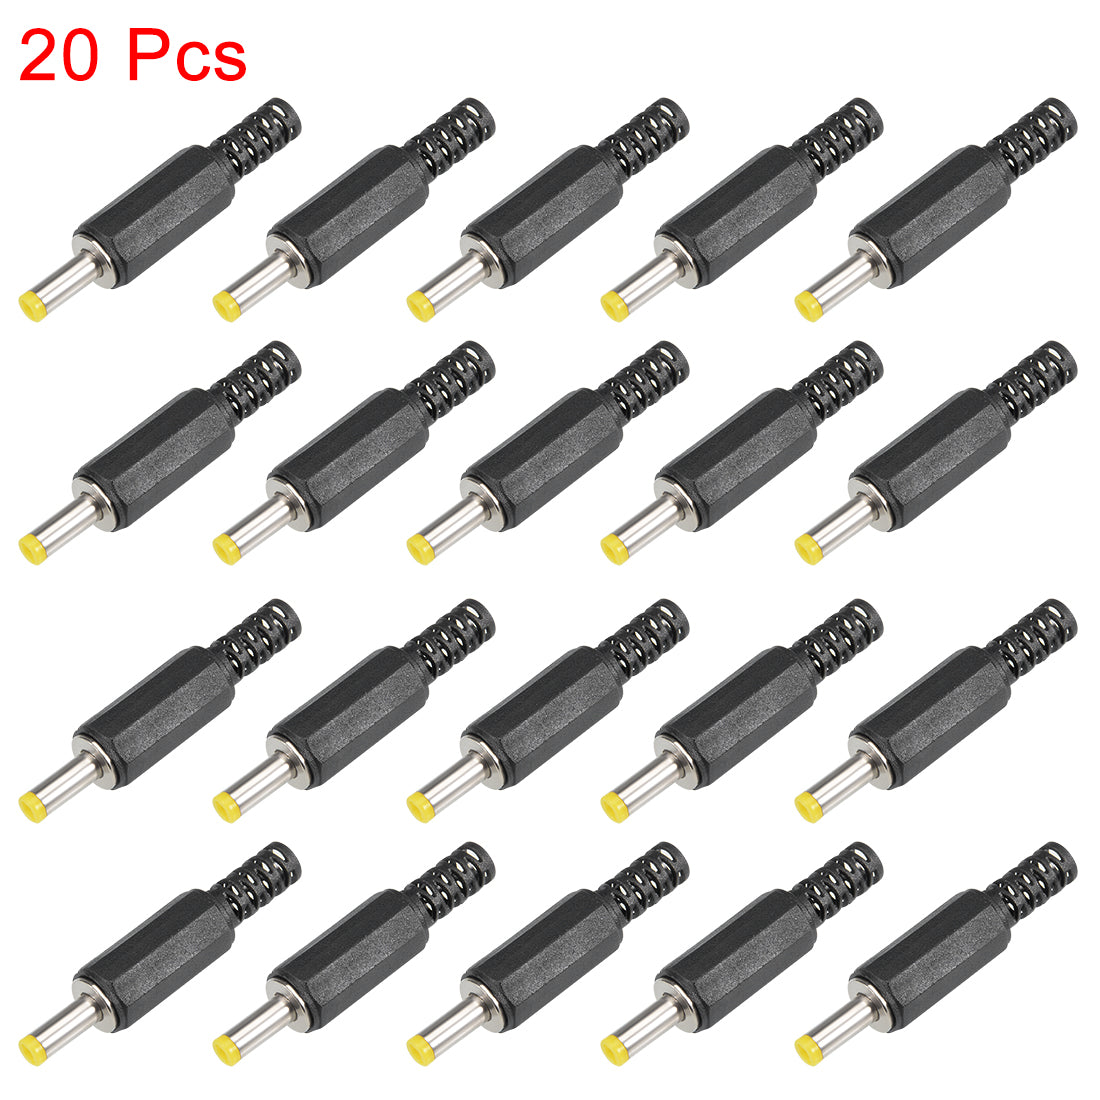 uxcell Uxcell 20Pcs DC Male Connector 4.0mm x 1.7mm Power Cable Jack Adapter Black